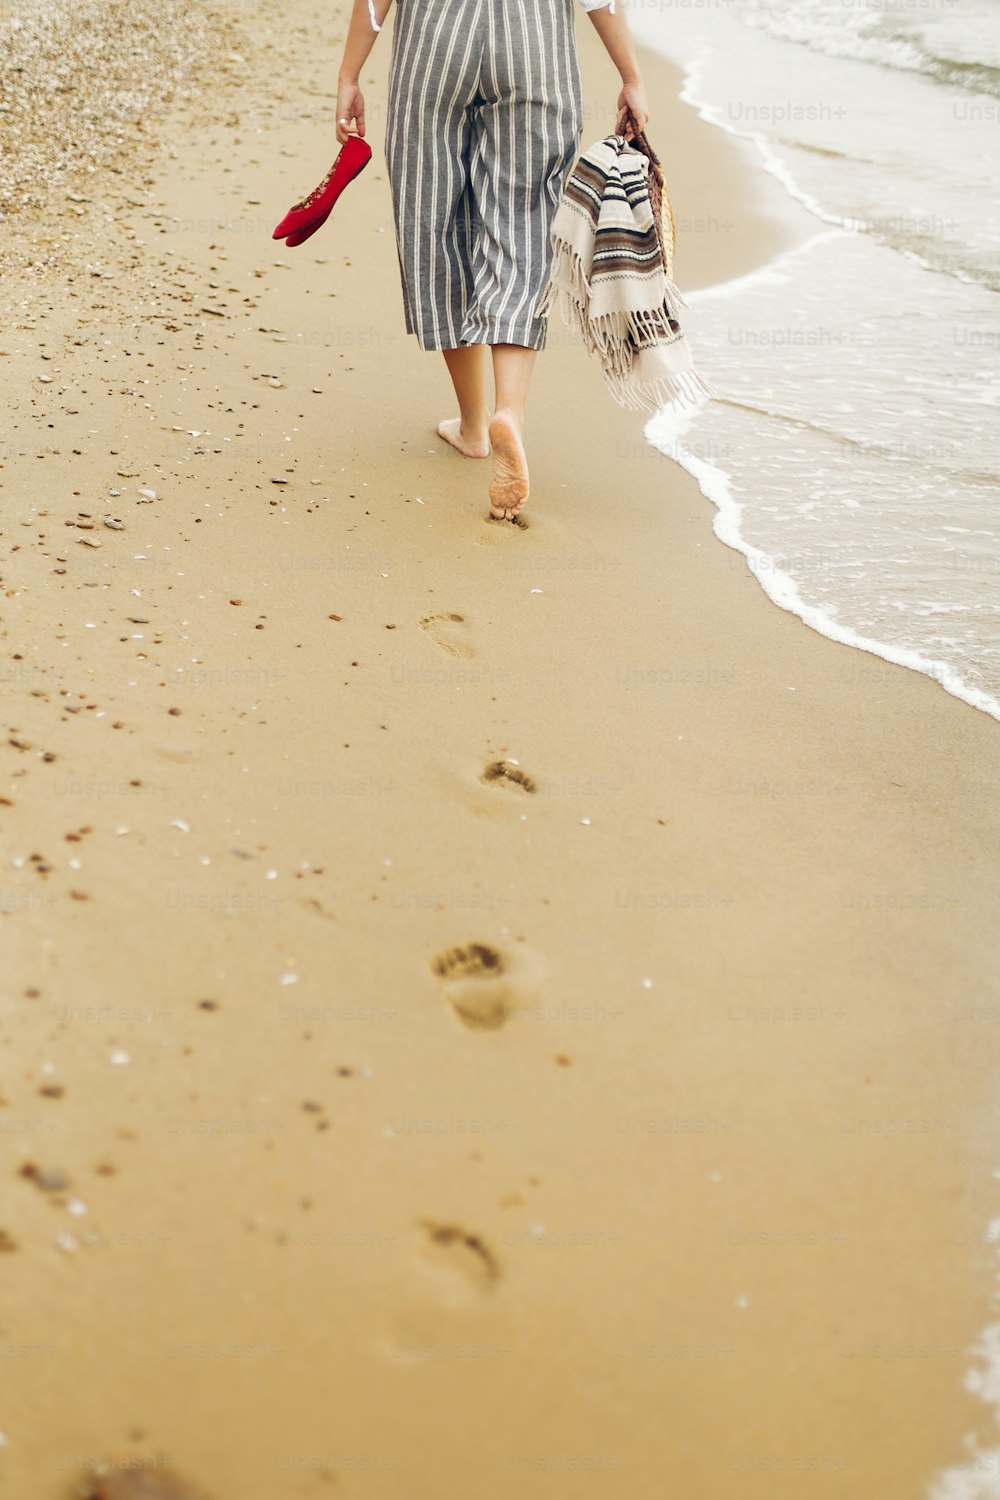 Woman walking barefoot on beach, back view of legs. Young girl relaxing on sandy beach, walking with shoes and bag in hands. Summer vacation concept